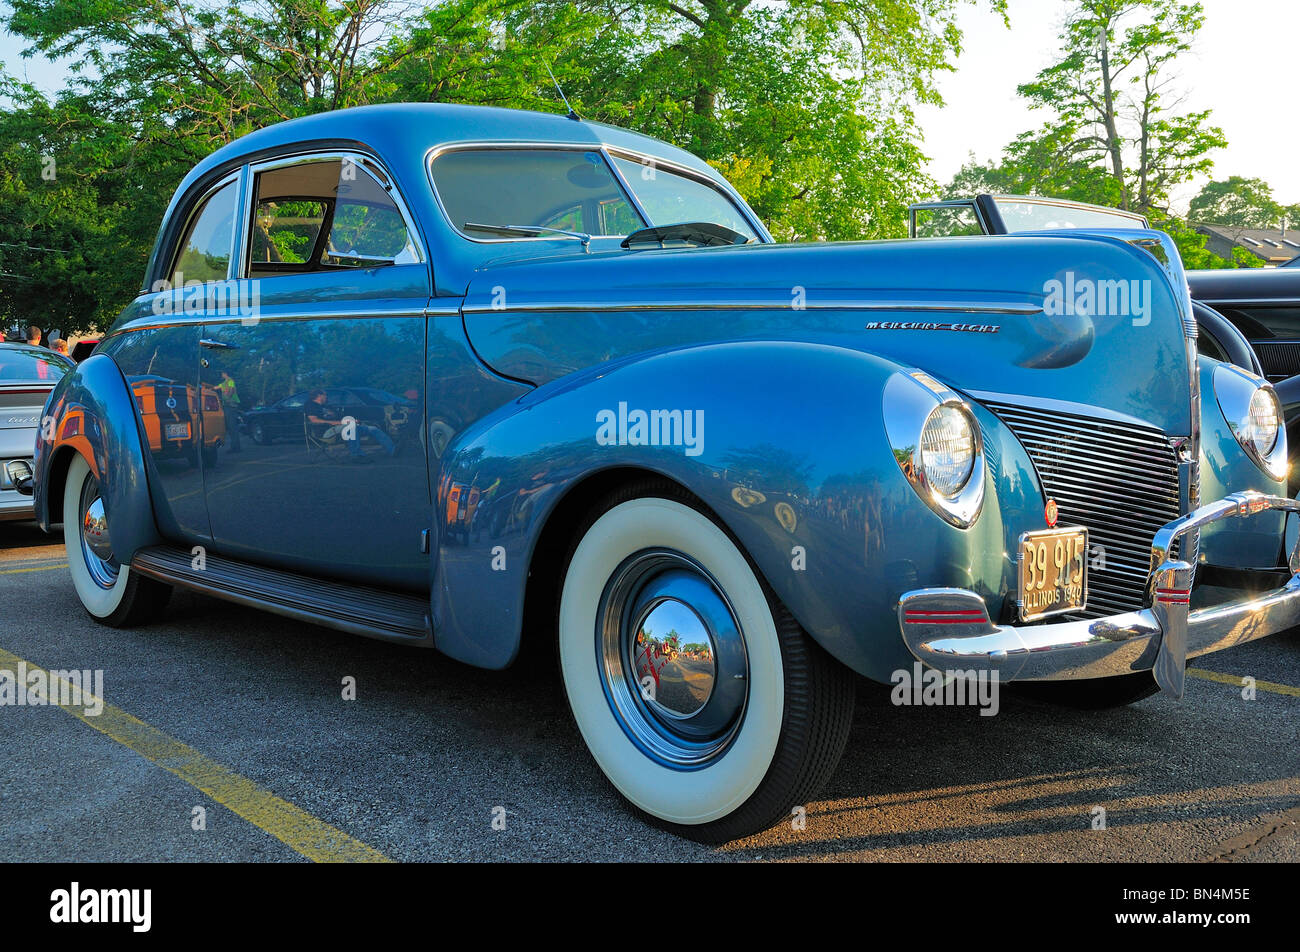 1940 Mercury at classic car show in small town America. Stock Photo